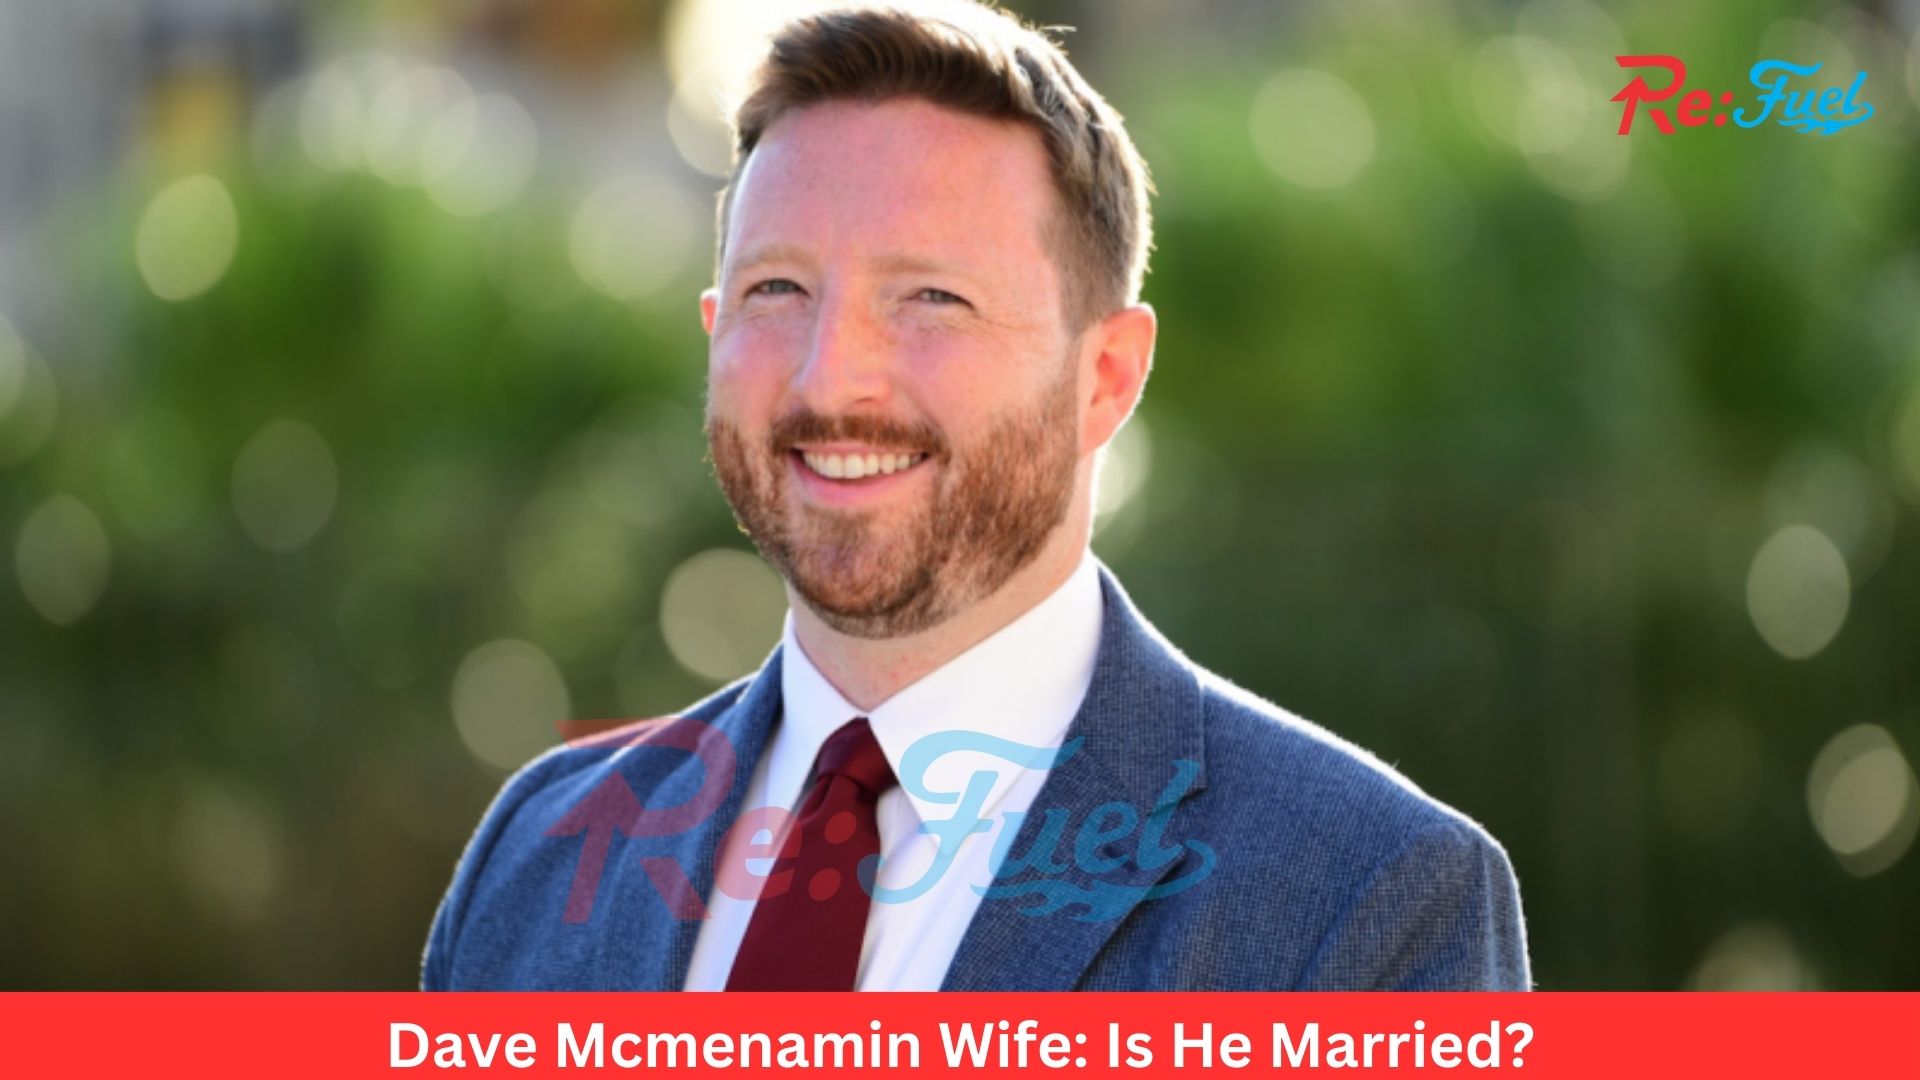 Dave Mcmenamin Wife: Is He Married?